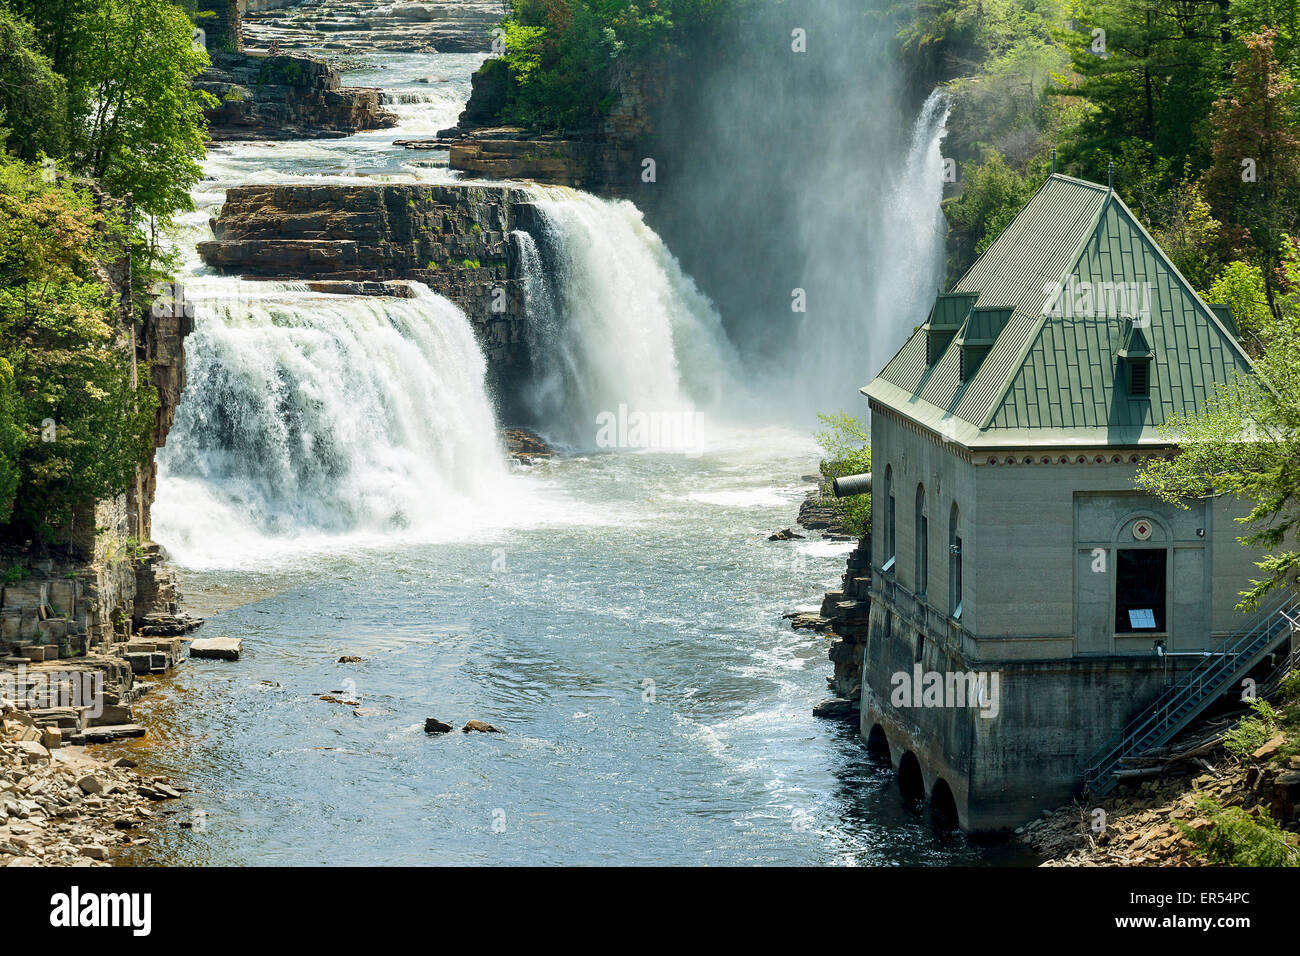 Panoramic view of the Rainbow Falls and the Hydro-electric Facility in Ausable Chasm, Keeseville, New York Stock Photo